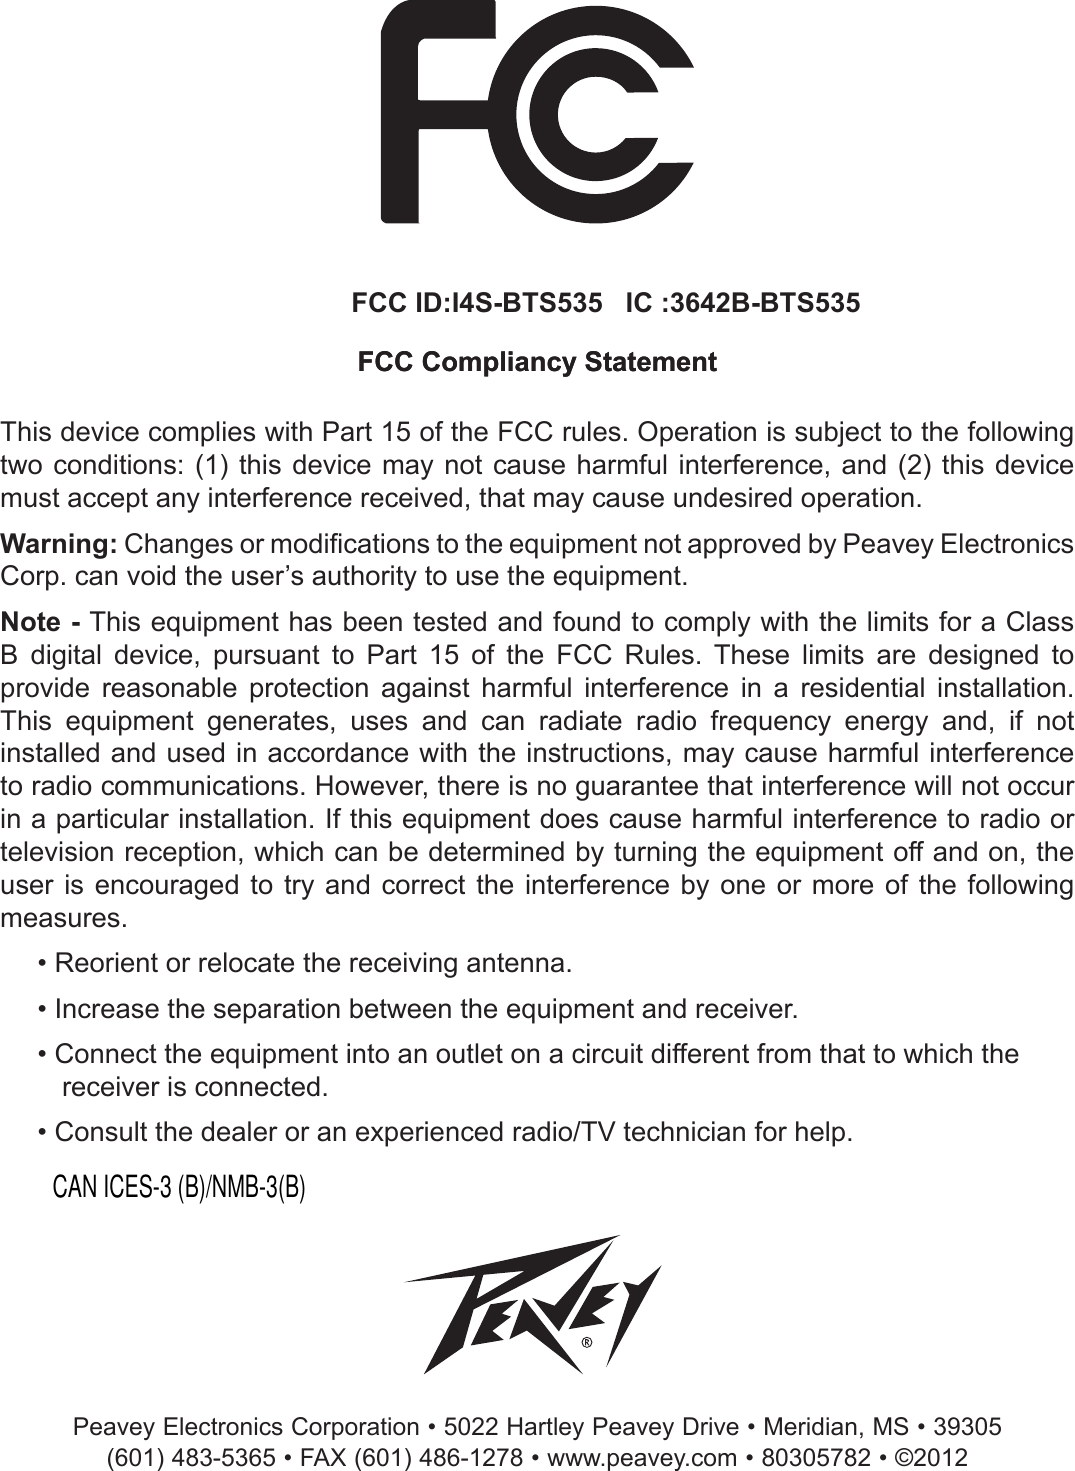 FCC Compliancy StatementThis device complies with Part 15 of the FCC rules. Operation is subject to the following two conditions:  (1) this  device may  not cause  harmful interference,  and (2)  this device must accept any interference received, that may cause undesired operation.Warning: Changes or modications to the equipment not approved by Peavey Electronics Corp. can void the user’s authority to use the equipment.Note - This equipment has been tested and found to comply with the limits for a Class B  digital  device,  pursuant  to  Part  15  of  the  FCC  Rules.  These  limits  are  designed  to provide  reasonable  protection  against  harmful  interference  in  a  residential  installation. This  equipment  generates,  uses  and  can  radiate  radio  frequency  energy  and,  if  not installed and used in accordance with the instructions, may cause harmful interference to radio communications. However, there is no guarantee that interference will not occur in a particular installation. If this equipment does cause harmful interference to radio or television reception, which can be determined by turning the equipment off and on, the user is encouraged  to  try and correct  the interference by one  or more of  the  following measures.• Reorient or relocate the receiving antenna.• Increase the separation between the equipment and receiver.• Connect the equipment into an outlet on a circuit different from that to which the receiver is connected.• Consult the dealer or an experienced radio/TV technician for help. Peavey Electronics Corporation • 5022 Hartley Peavey Drive • Meridian, MS • 39305(601) 483-5365 • FAX (601) 486-1278 • www.peavey.com • 80305782 • ©2012FCC ID:I4S-BTS535   IC :3642B-BTS535FCC Compliancy StatementCAN ICES-3 (B)/NMB-3(B)